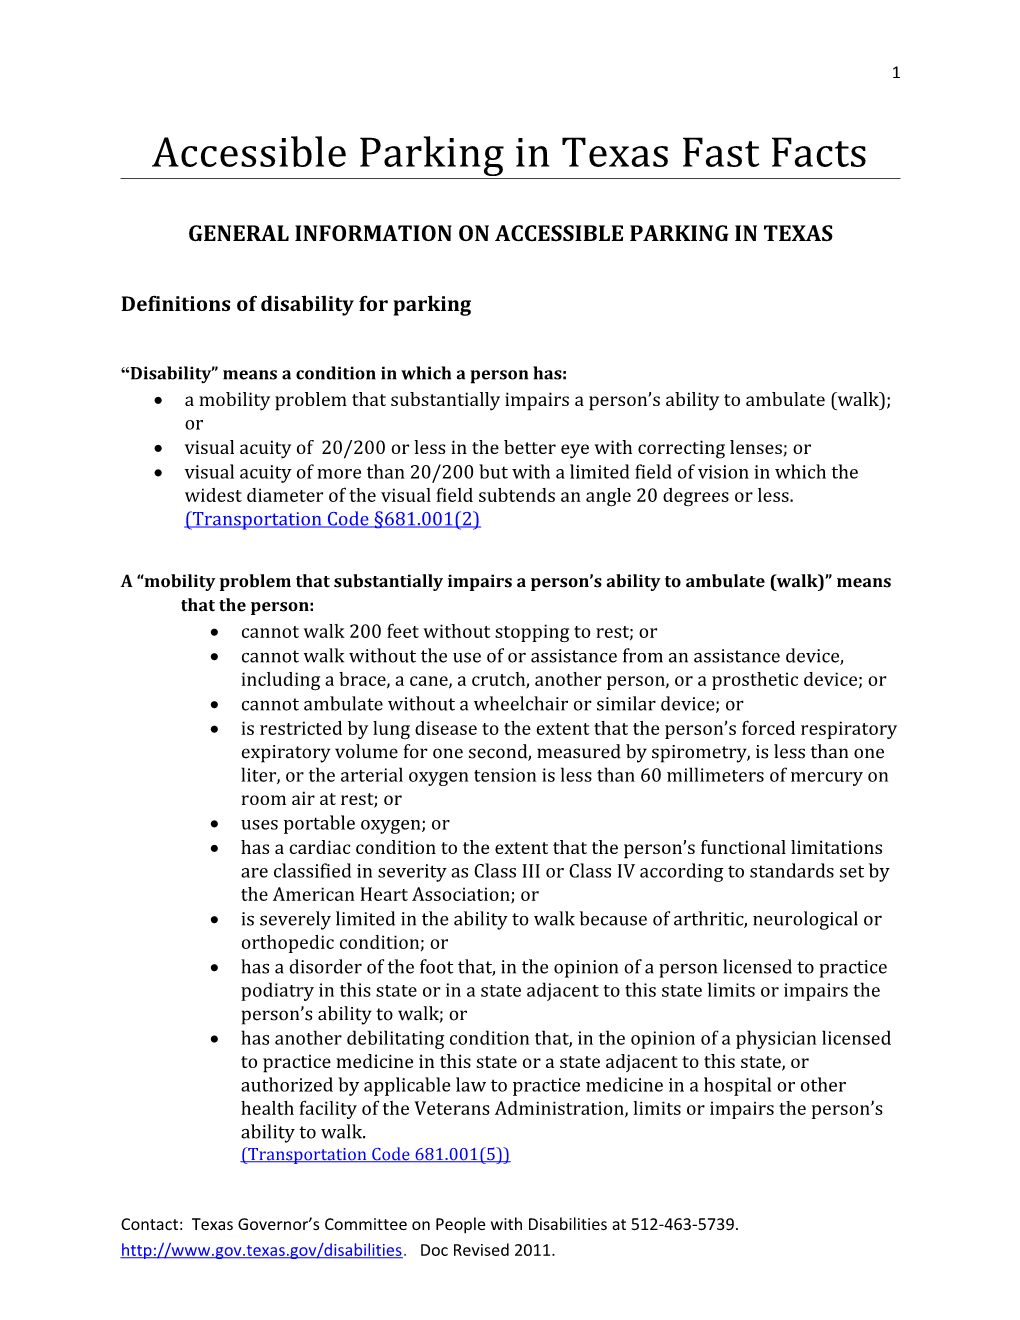 General Information on Accessible Parking in Texas